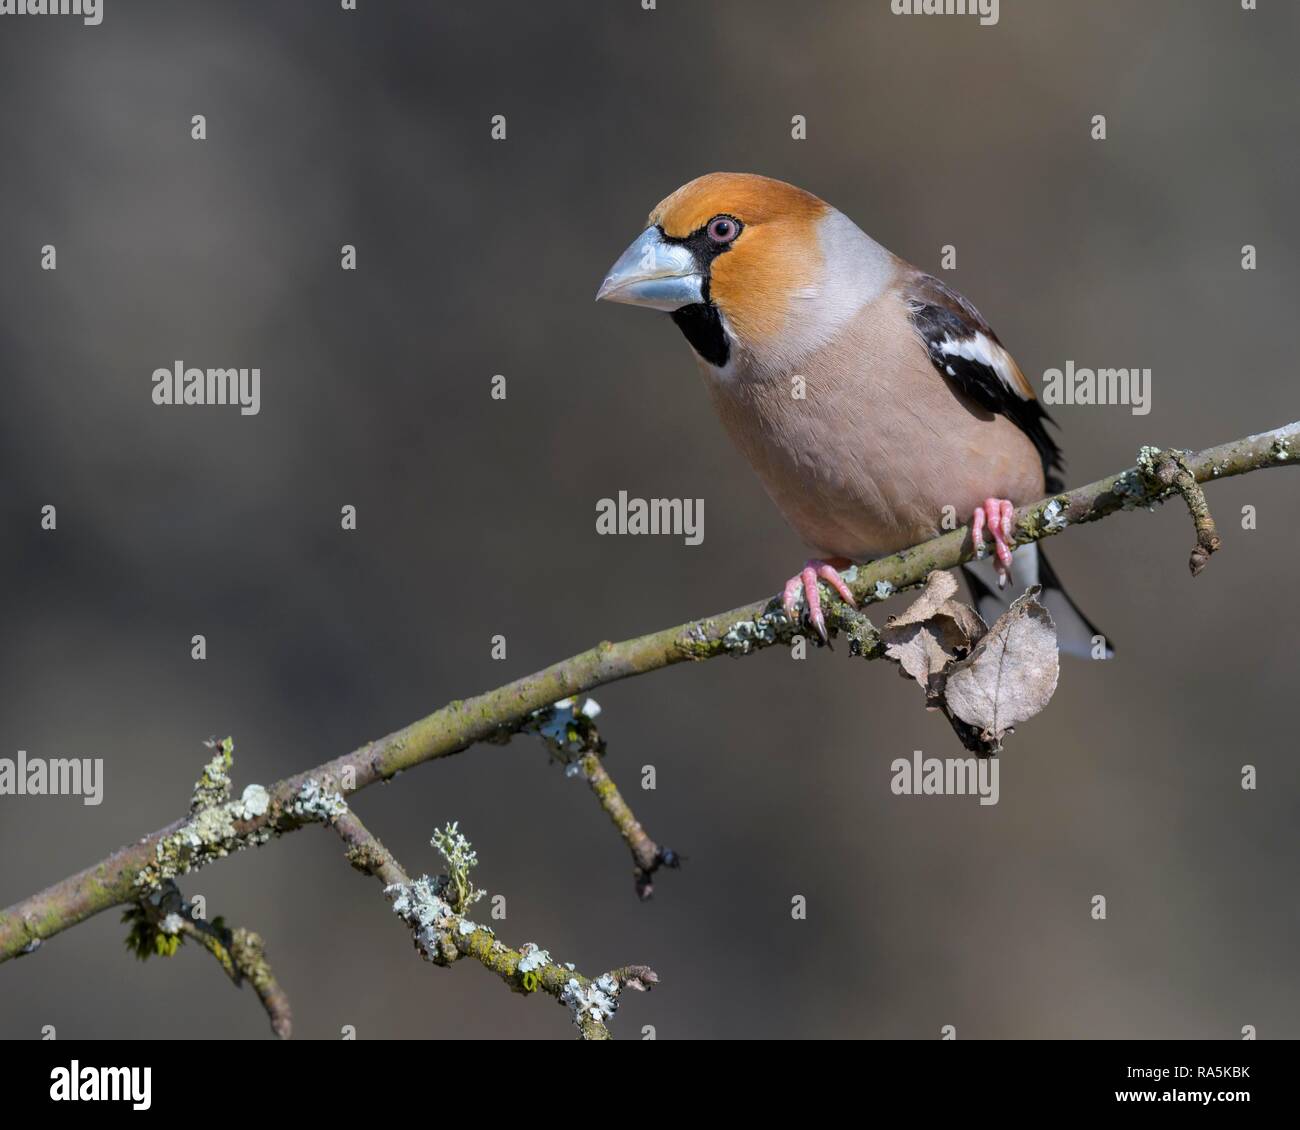 Hawfinch (Coccothraustes coccothraustes), in a splendid dress, sitting on a branch with lichens, biosphere area Swabian Alb Stock Photo